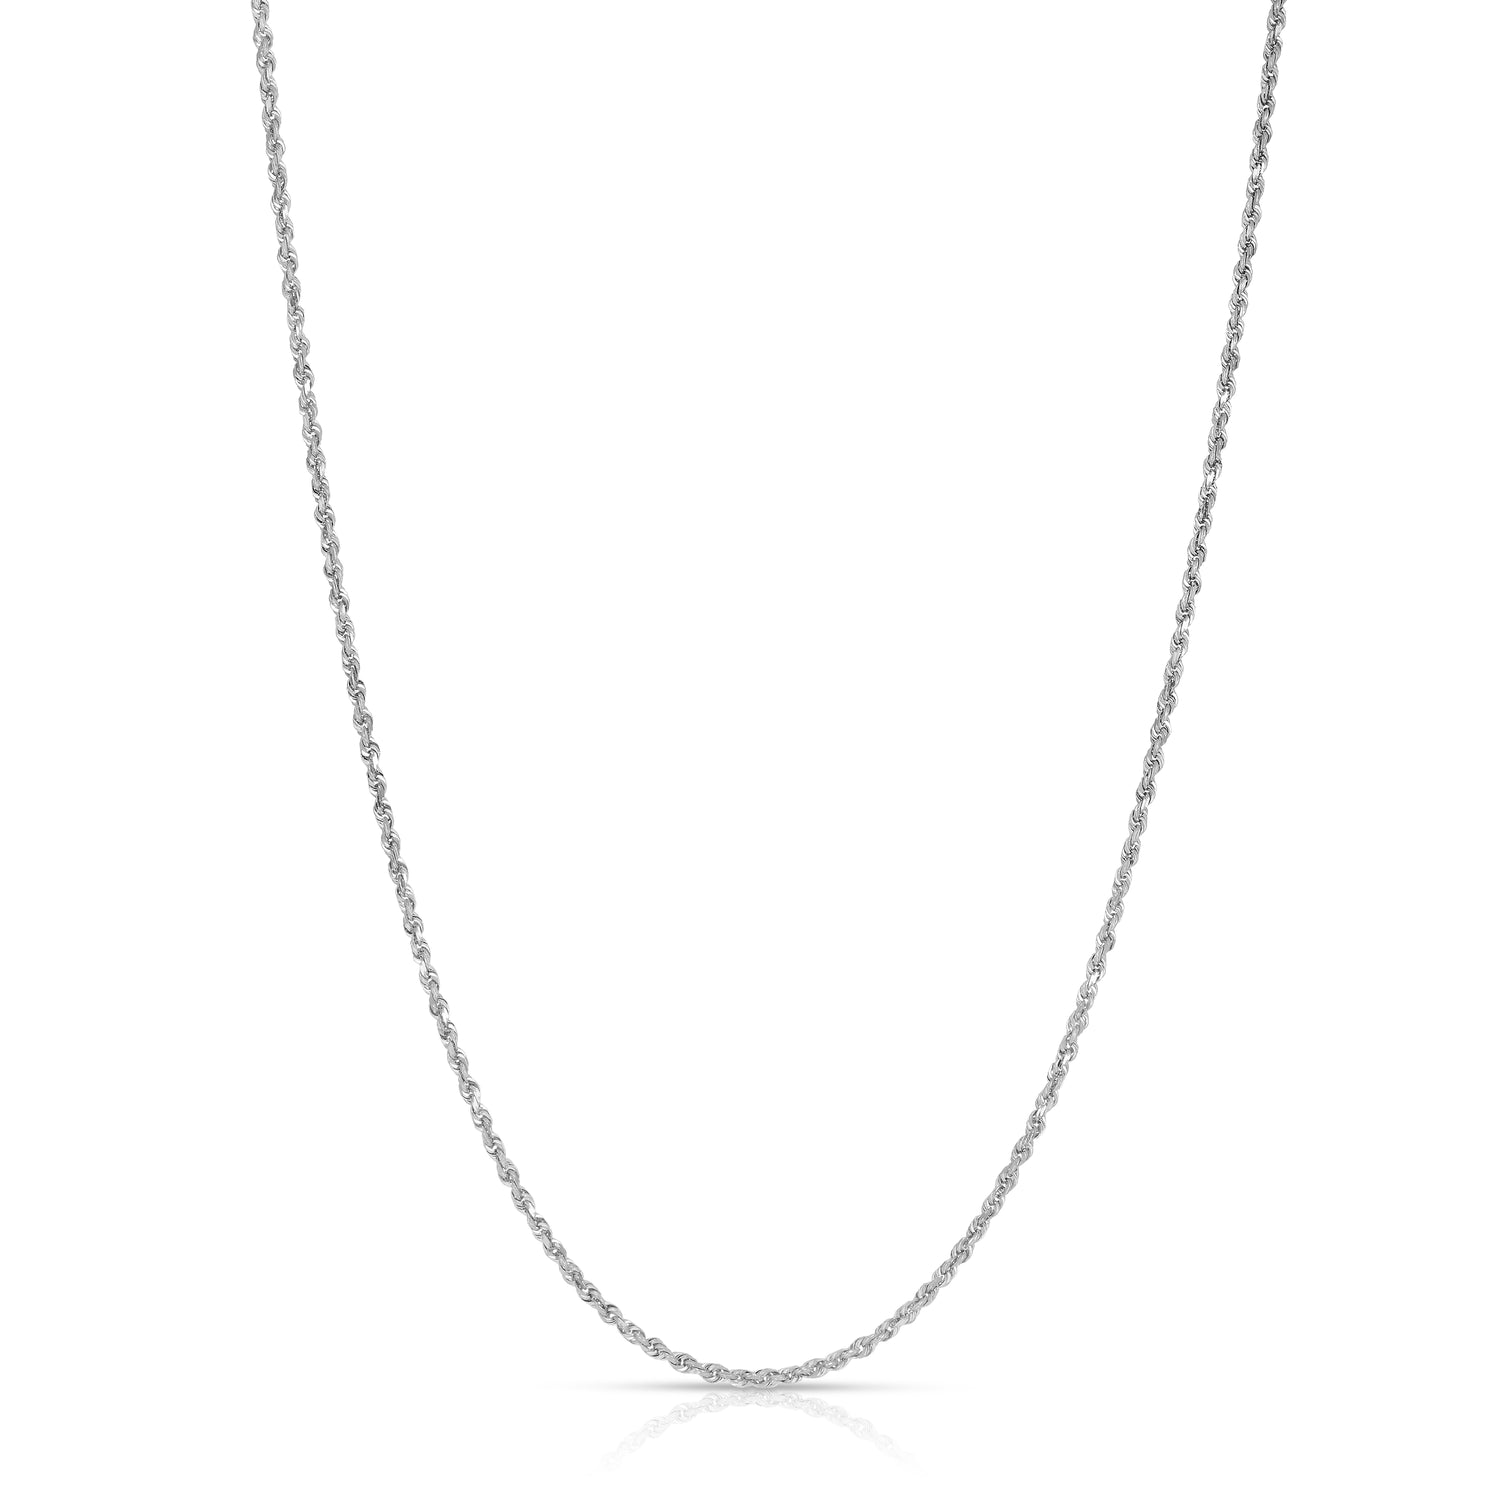 10k White Gold 2.25mm Solid Rope Chain Diamond Cut Necklace